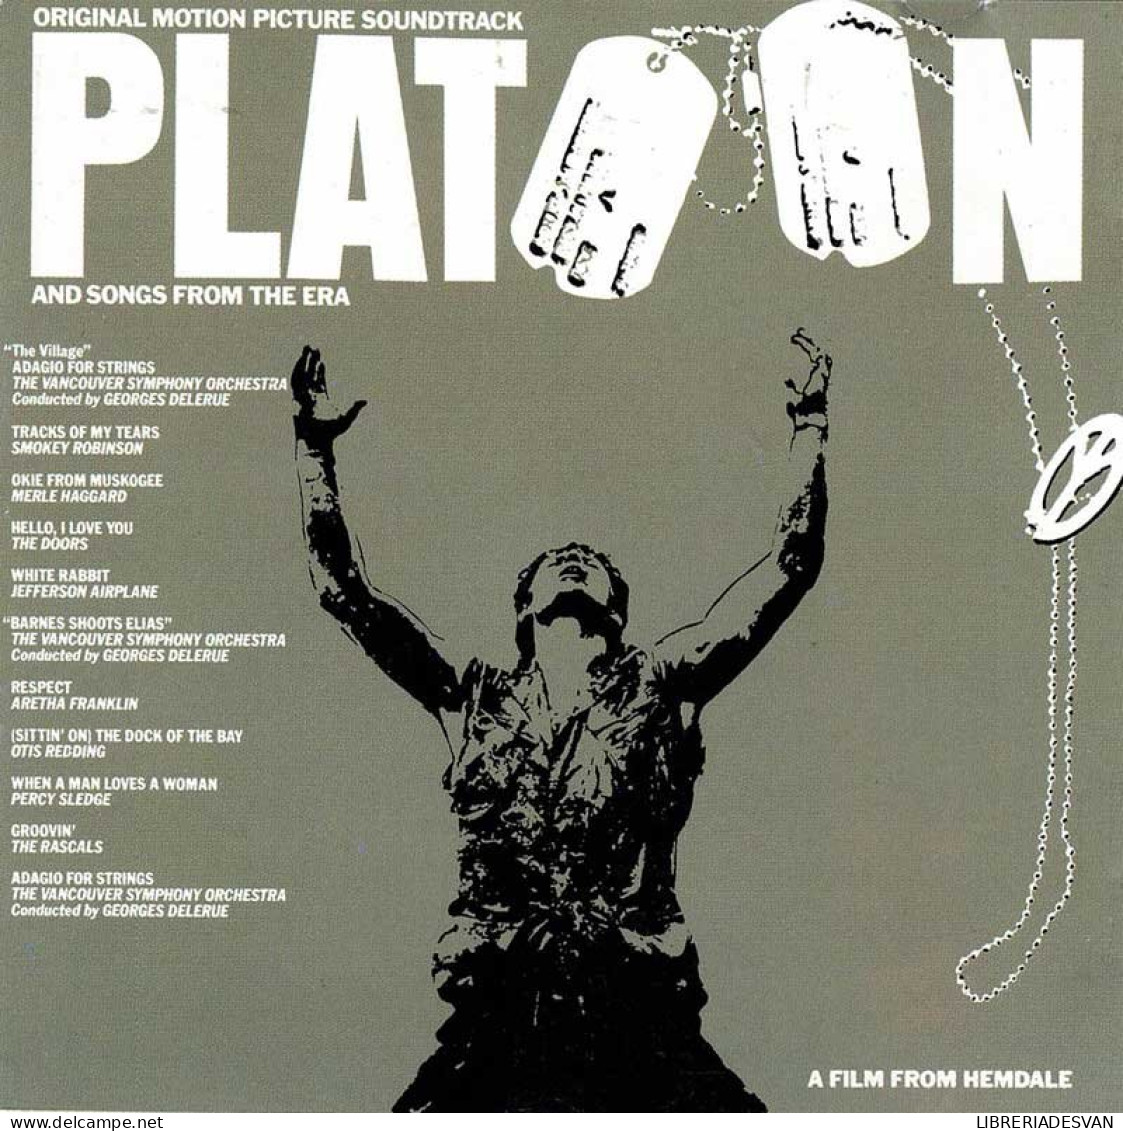 Platoon (Original Motion Picture Soundtrack And Songs From The Era). CD - Soundtracks, Film Music